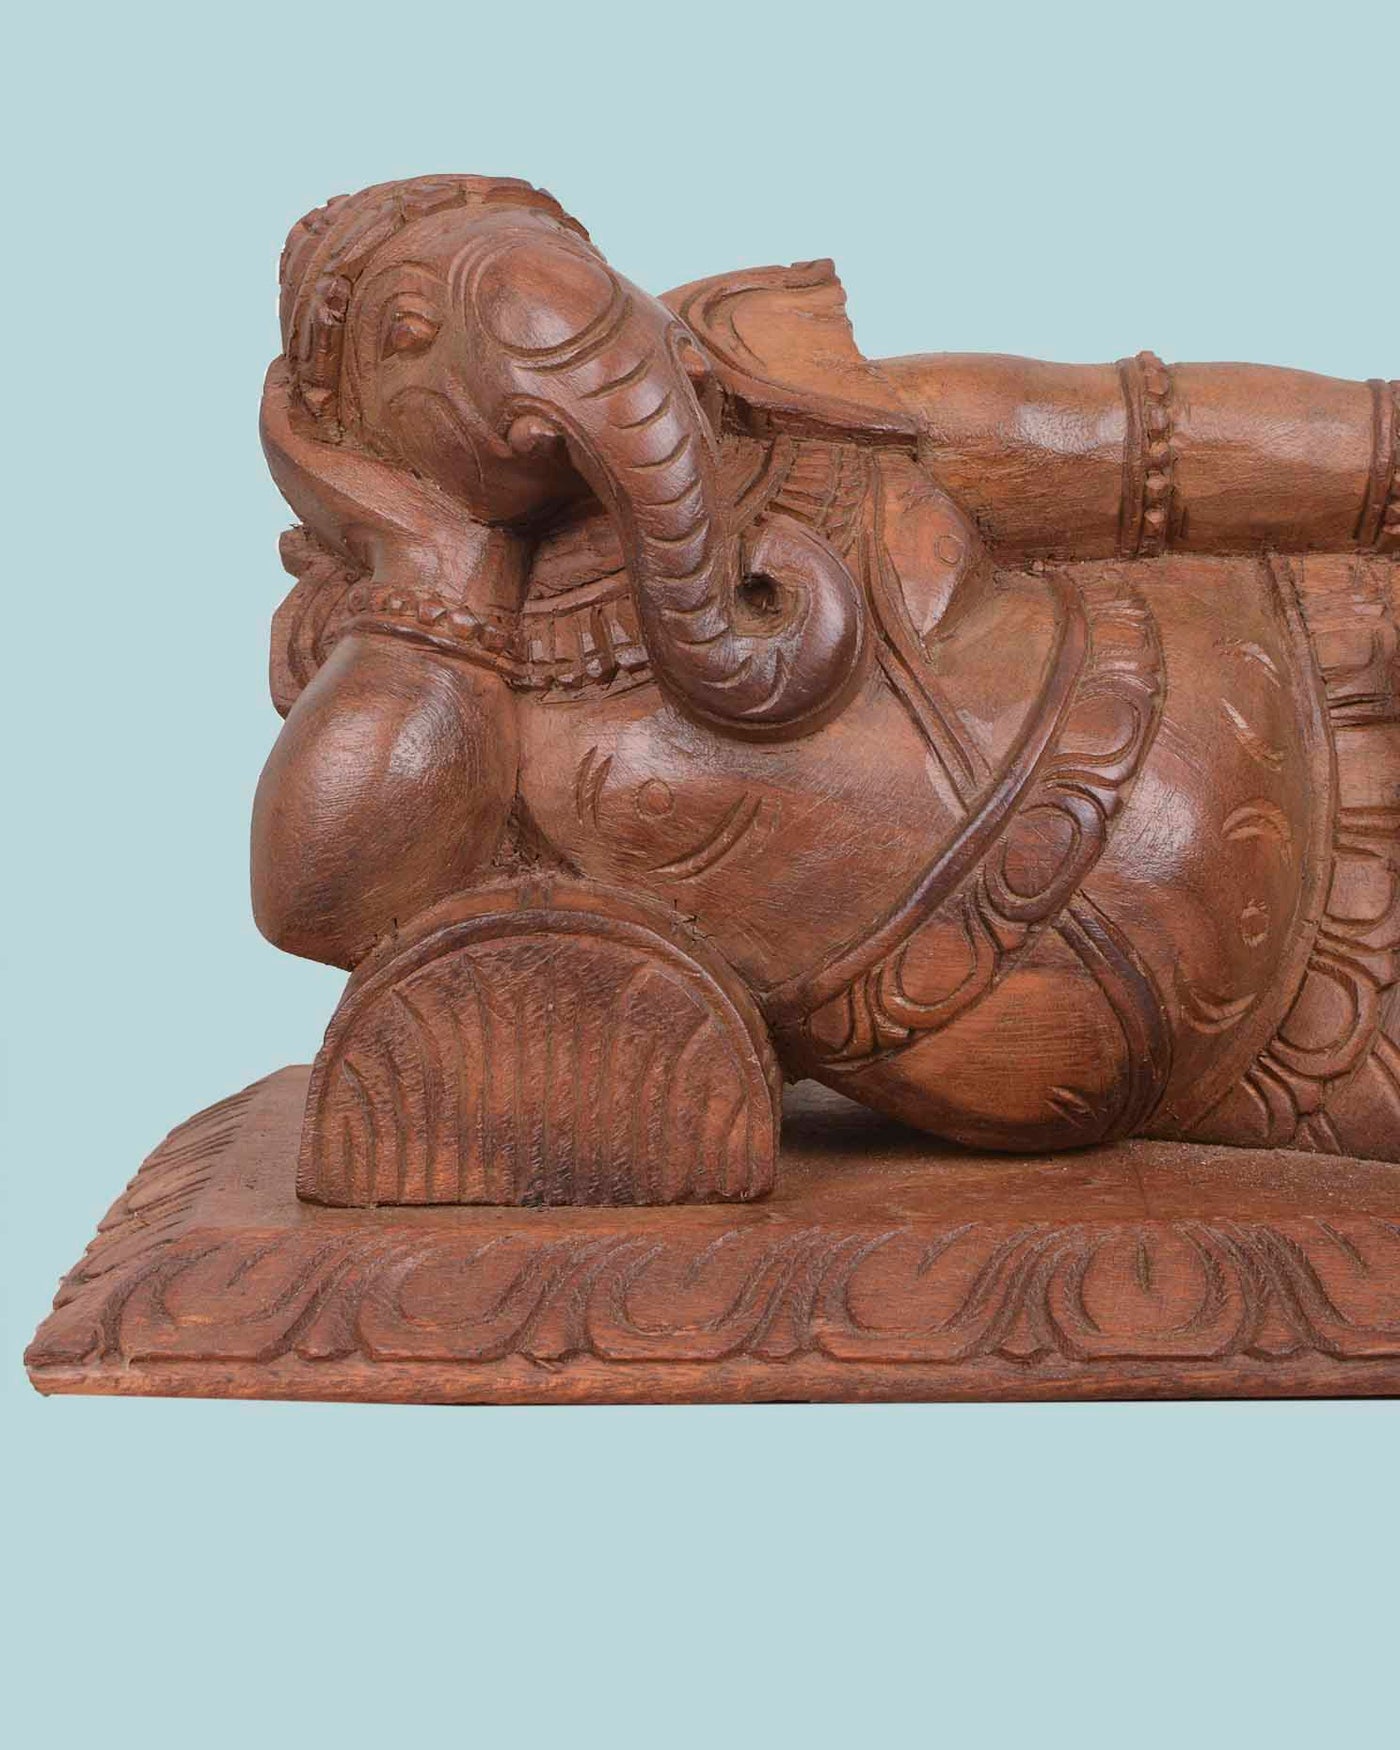 Wealthy Ganesha Reclining on pillow wall mount 15"